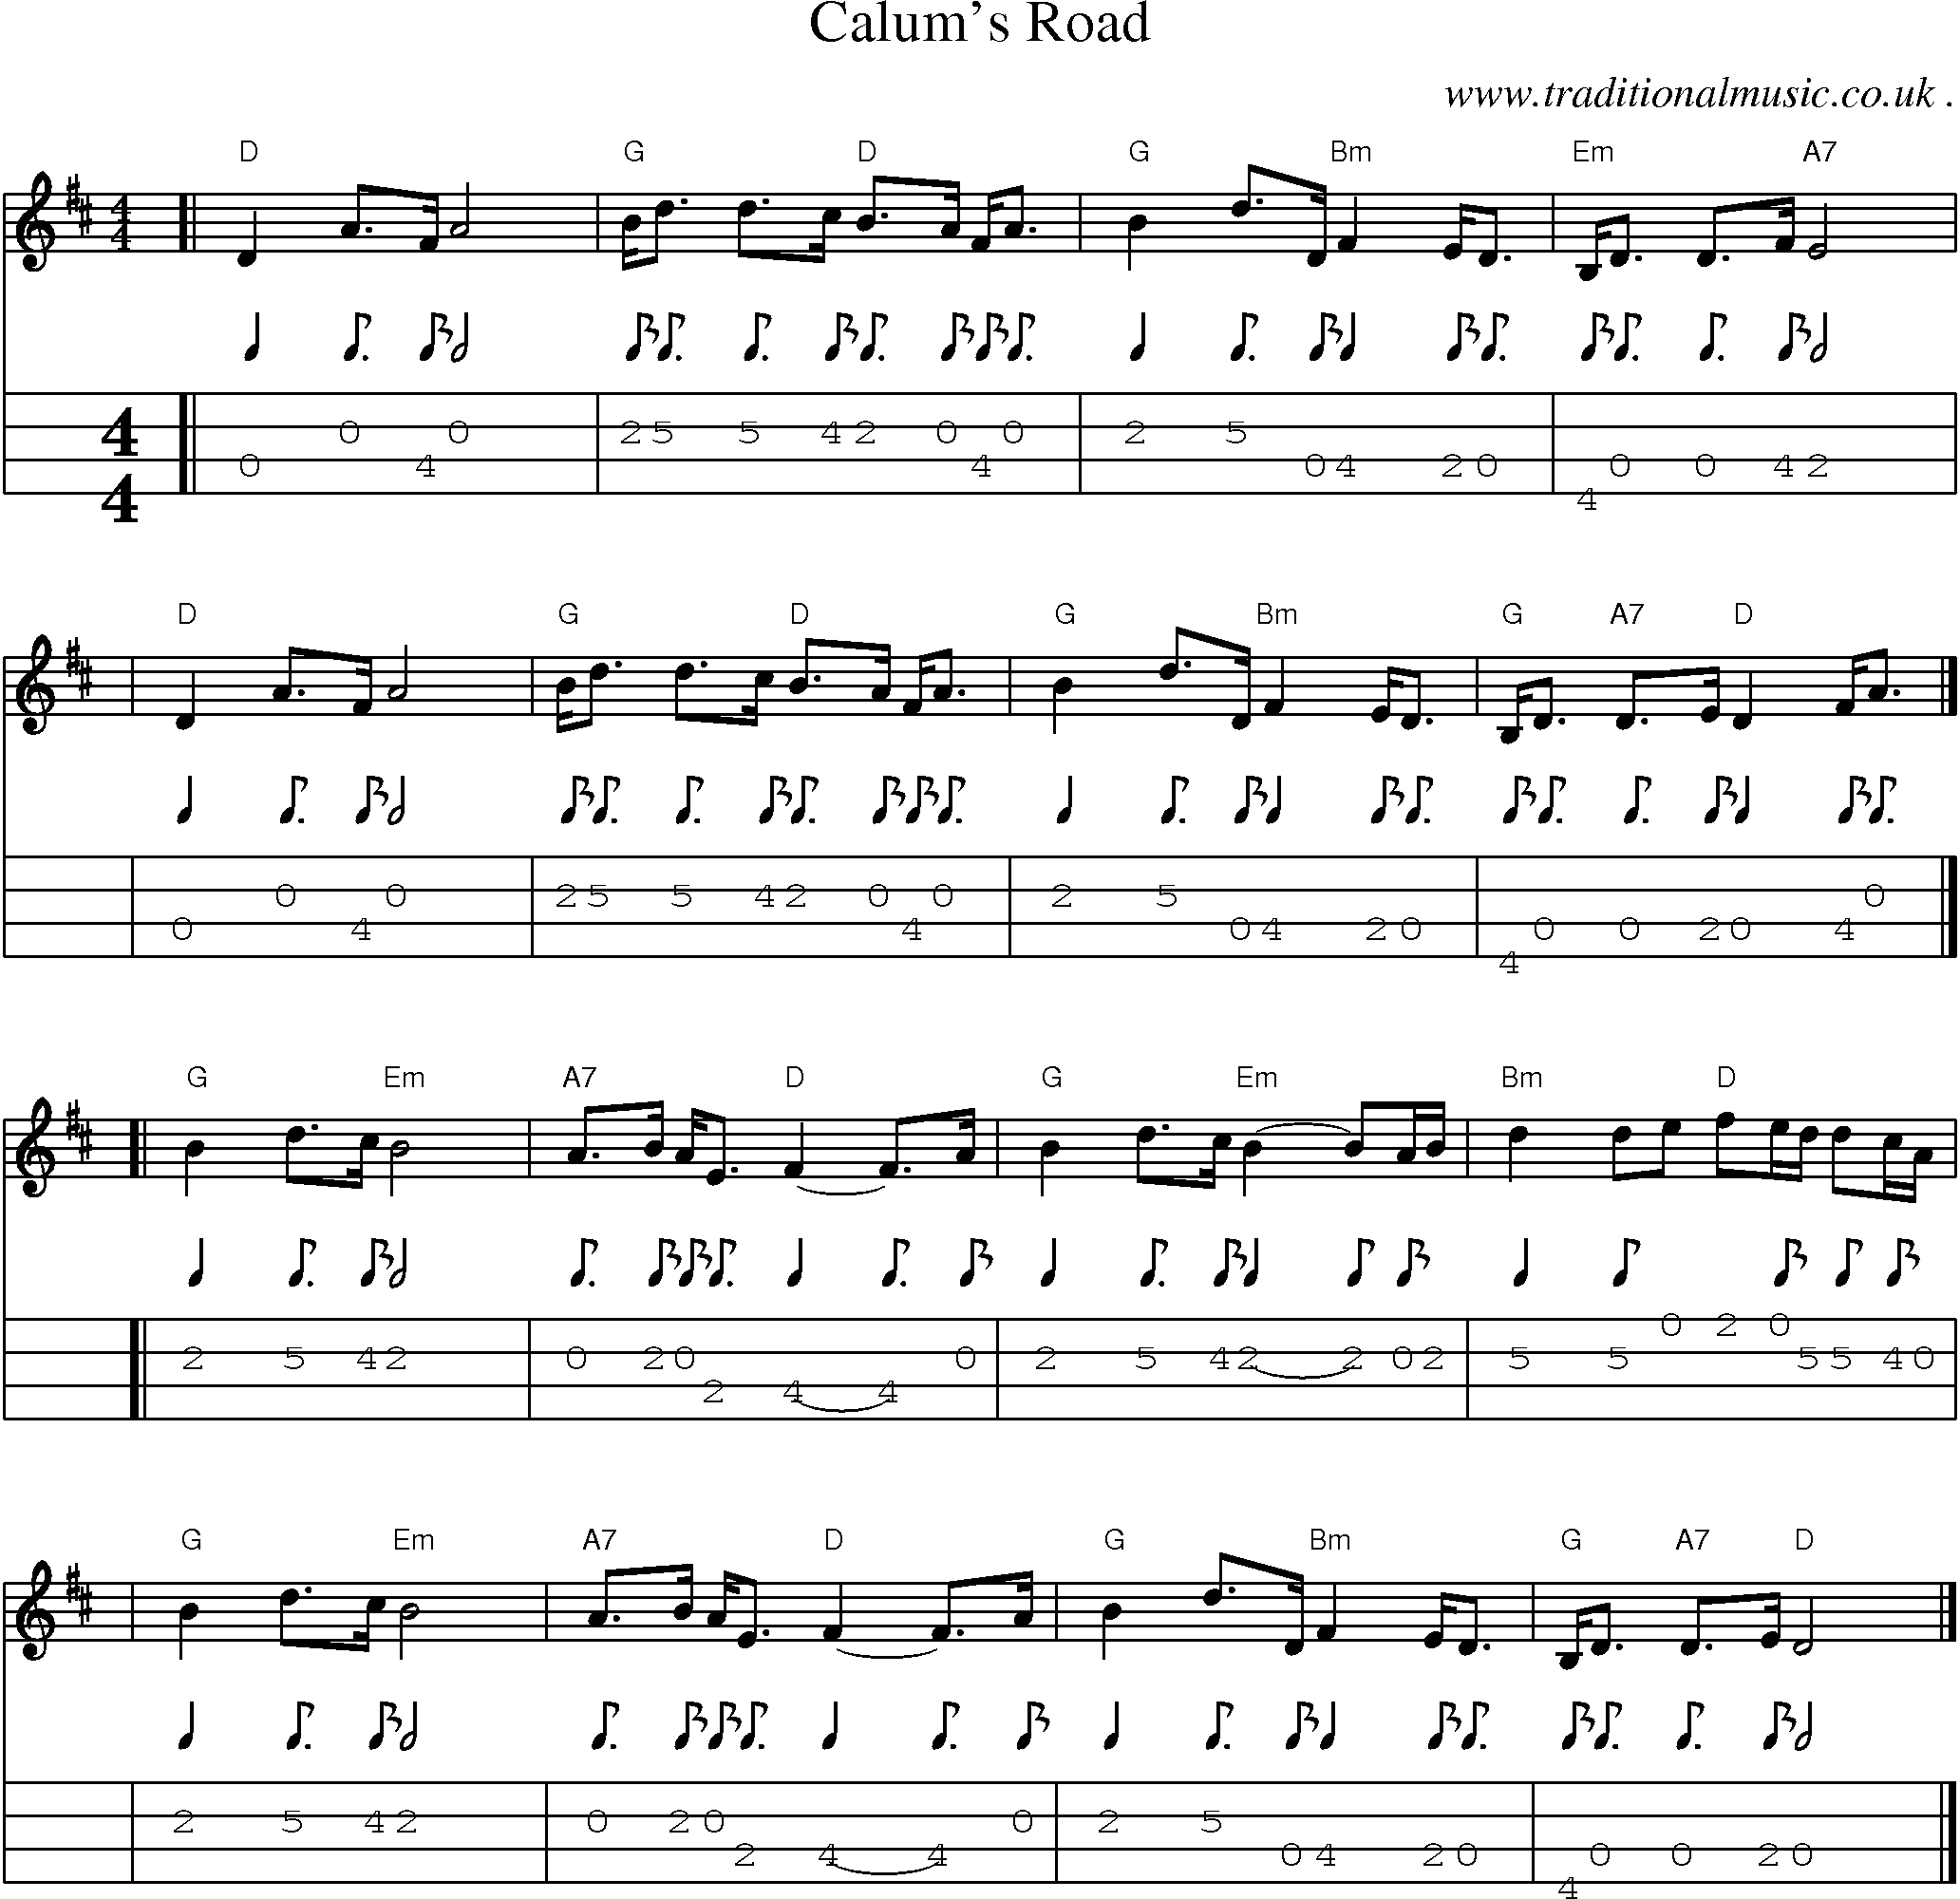 Sheet-music  score, Chords and Mandolin Tabs for Calums Road